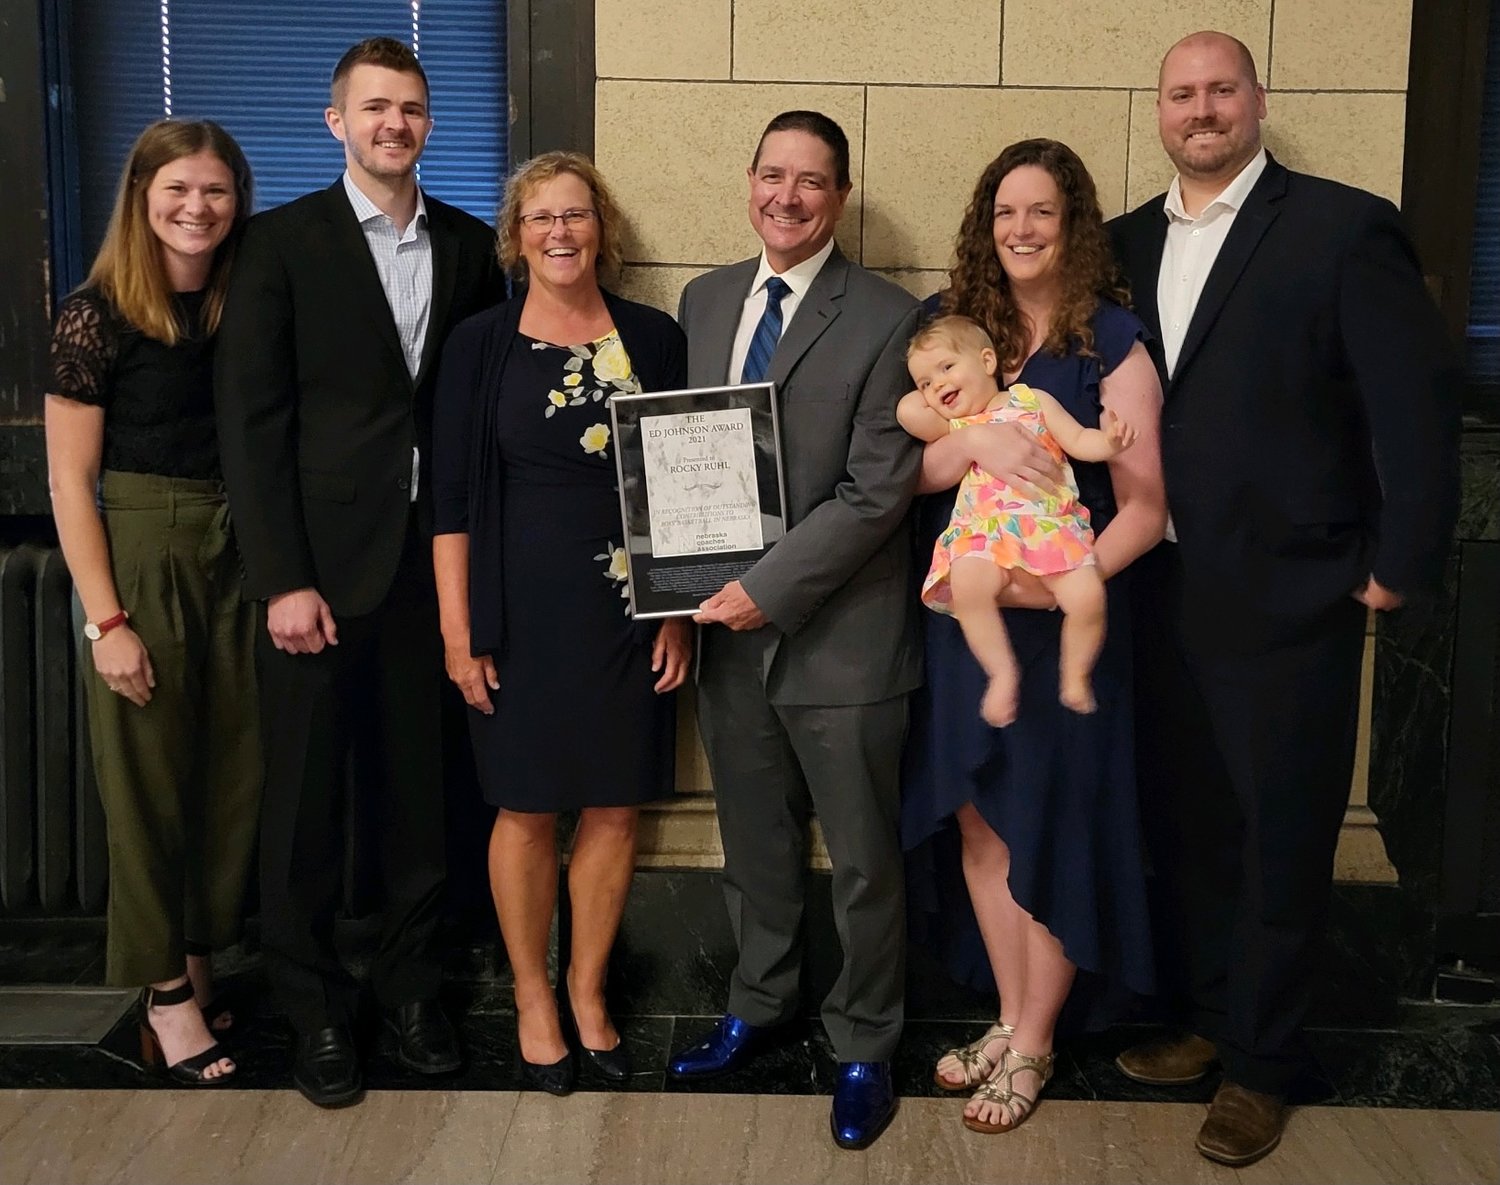 Members of the Ruhl family present at the awards banquet were (left) Halsey and Reggie Ruhl; Sylvia and Rocky;  Regan (holding Brogen) and Nate Ernstmeyer. Also on hand to support Rocky were Duane and Jean Blomenkamp of Wayne. Rocky received the Ed Johnson Award during the 53rd annual Nebraska Coaches Association Awards Banquet in Lincoln on July 25.